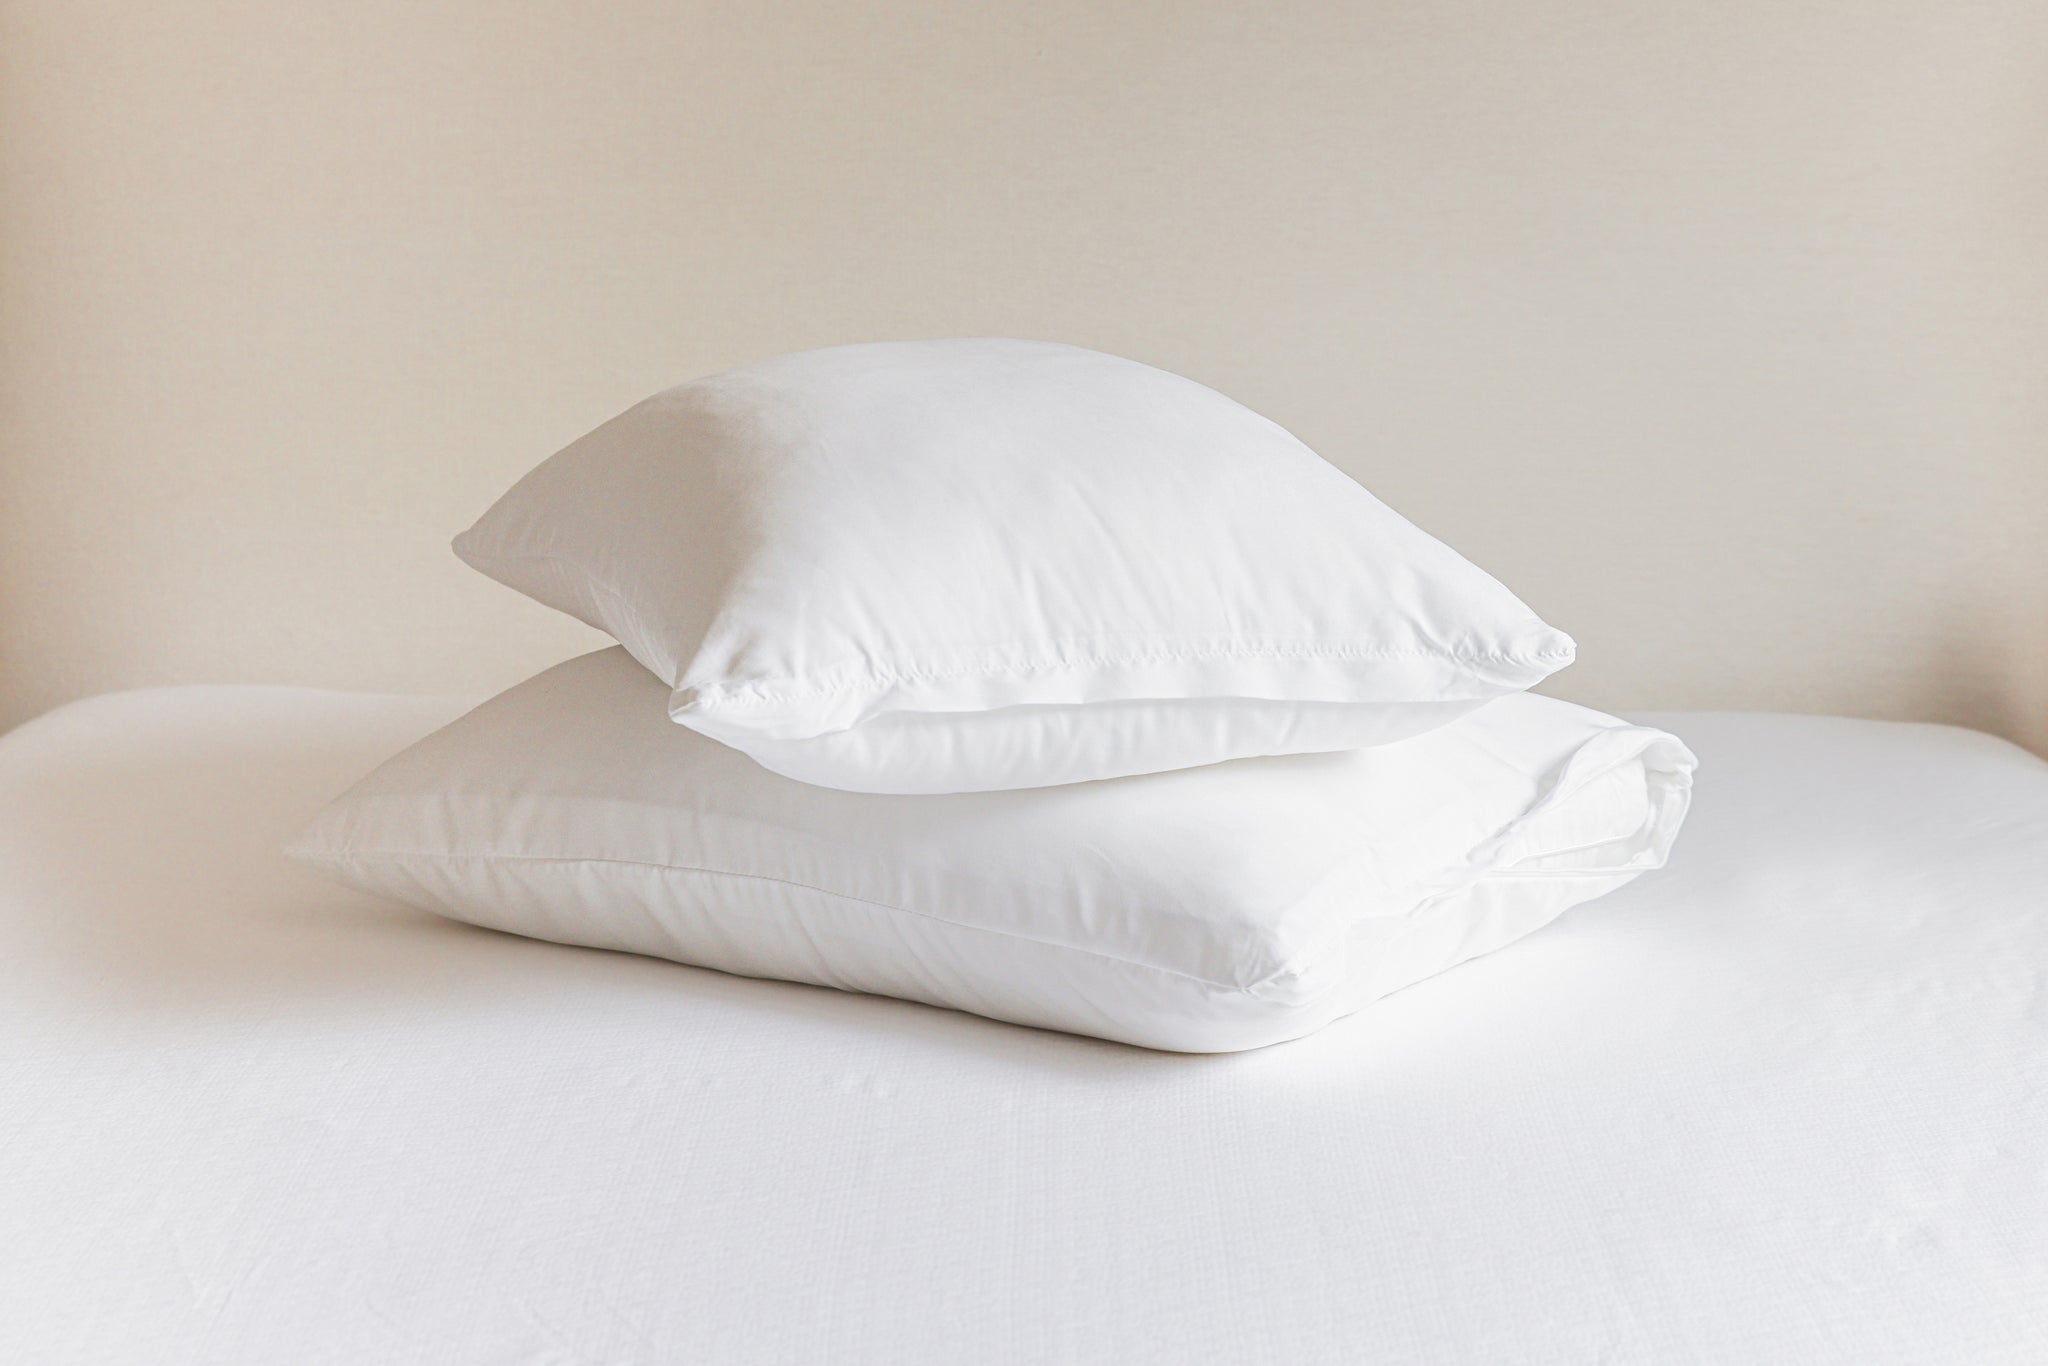 The benefits of using a pillow protector